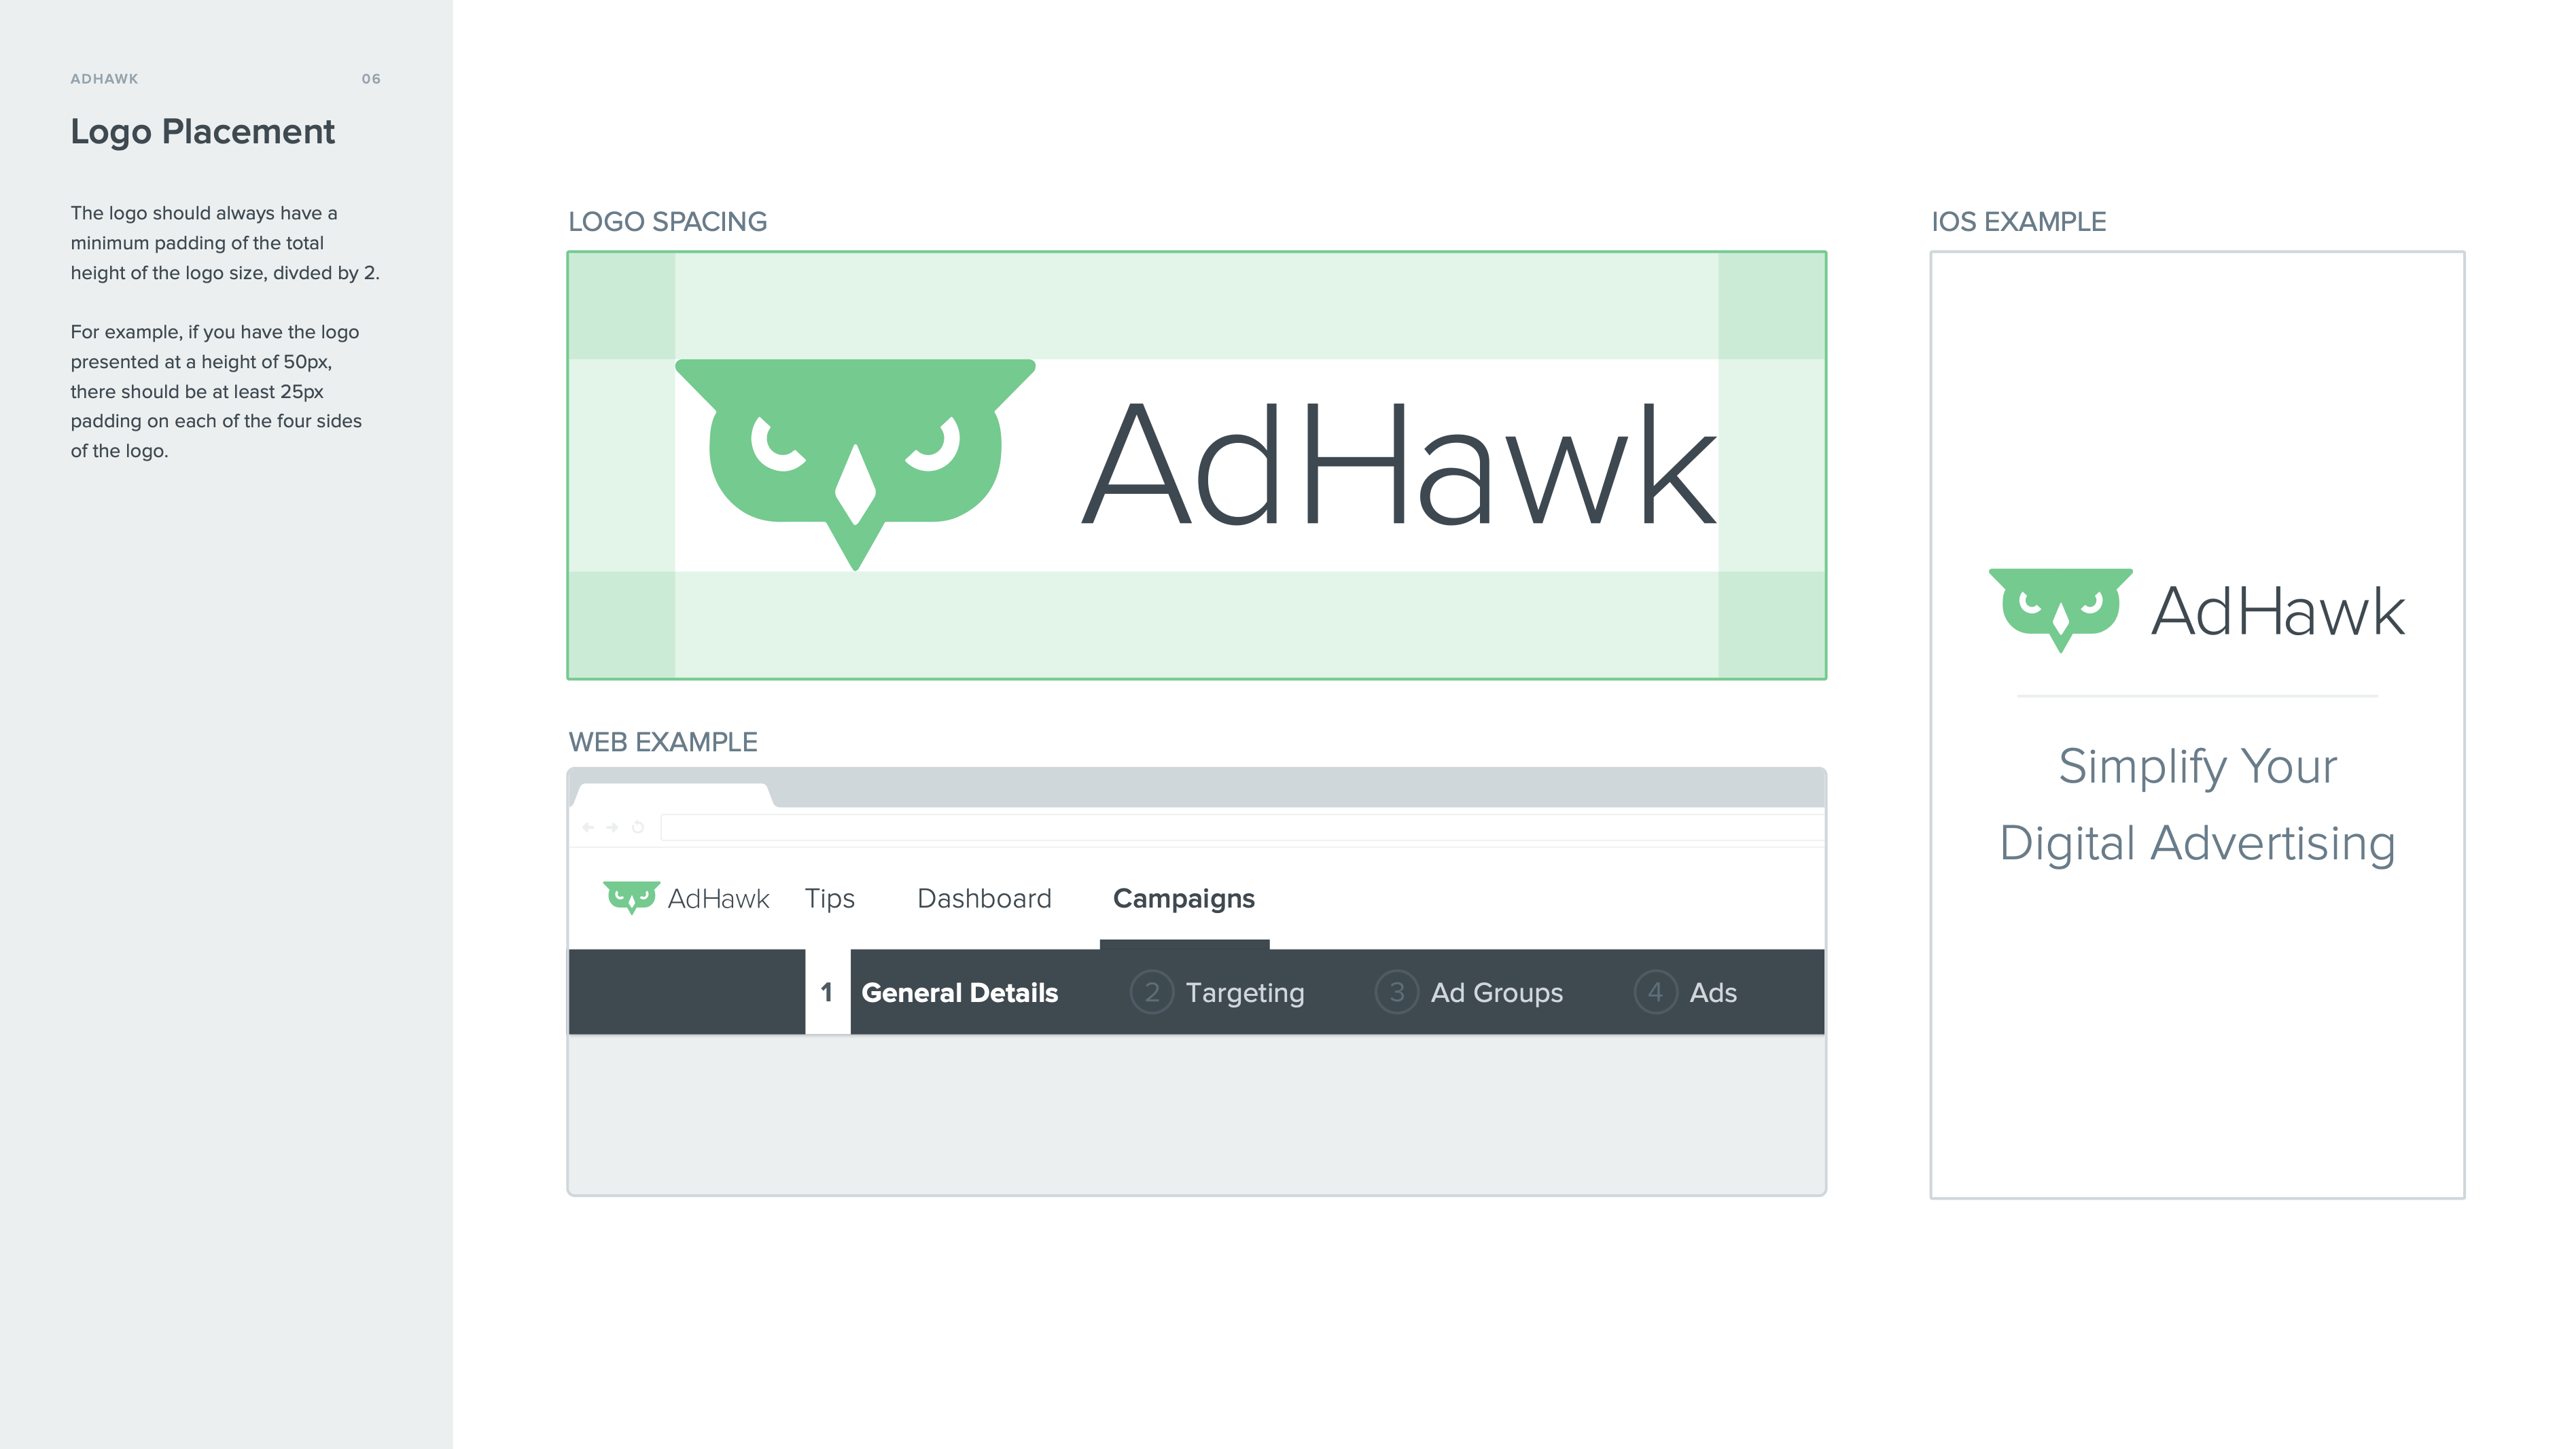 AdHawk Brand Guidelines - Logo Placement